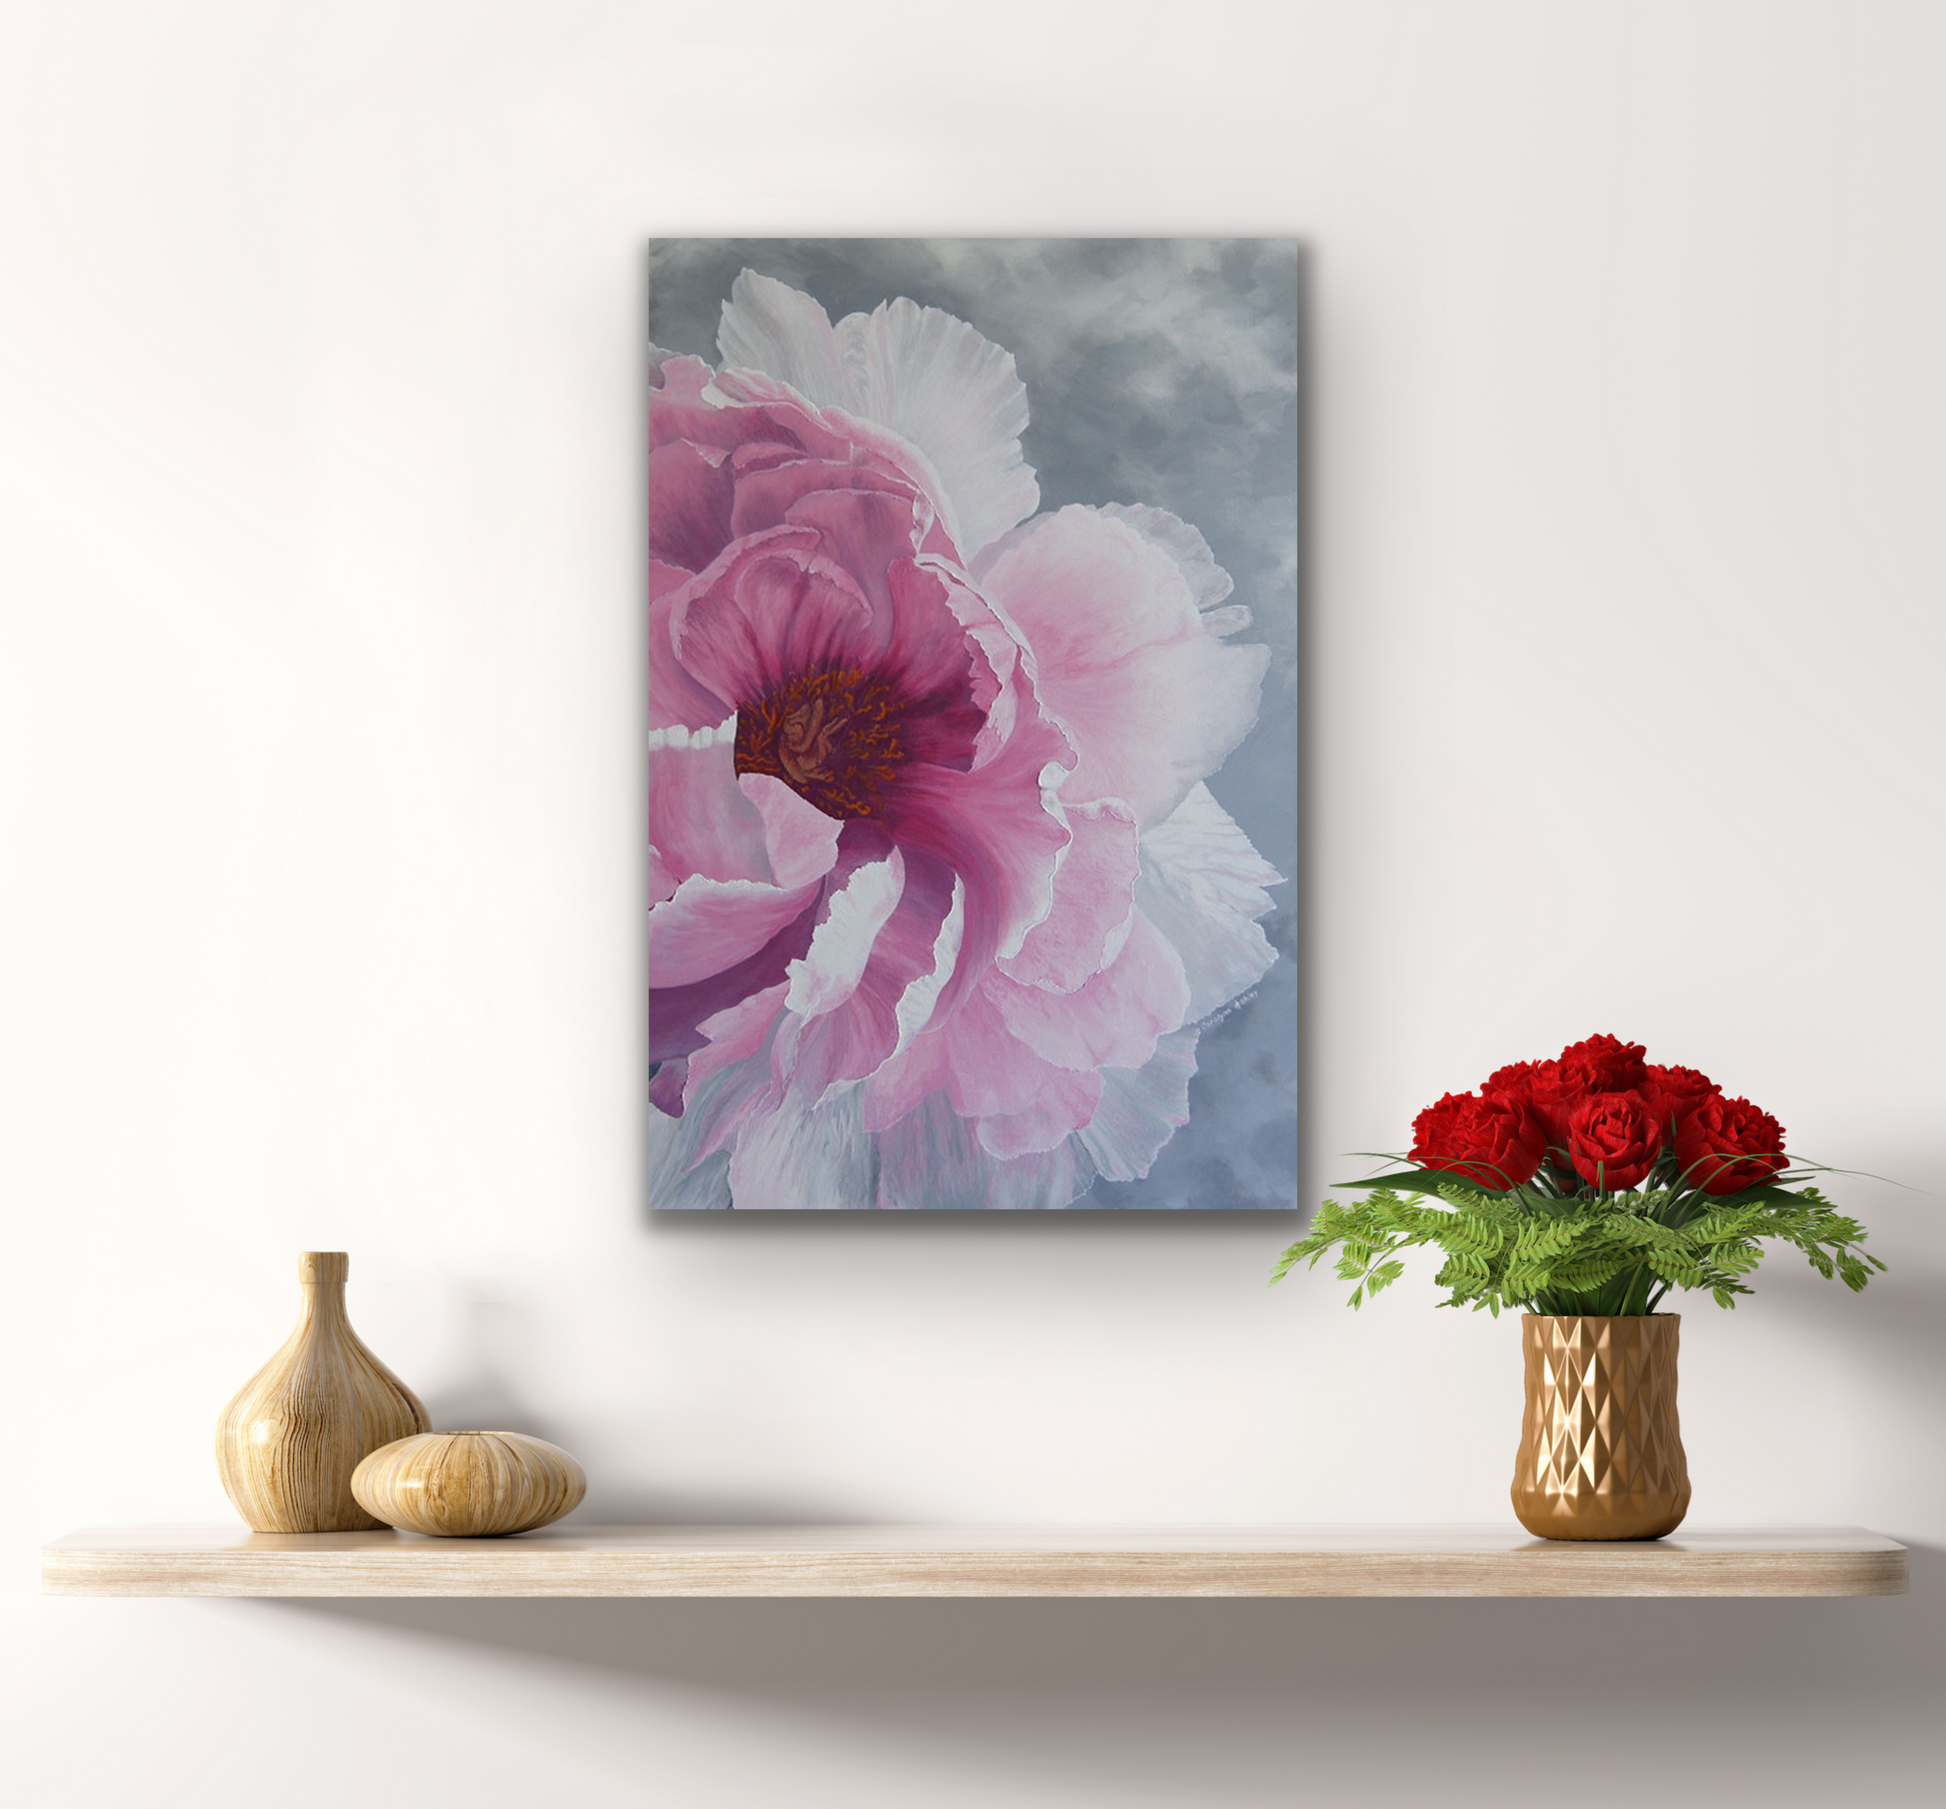 "Serenity" art work comes in five different canvas print sizes.